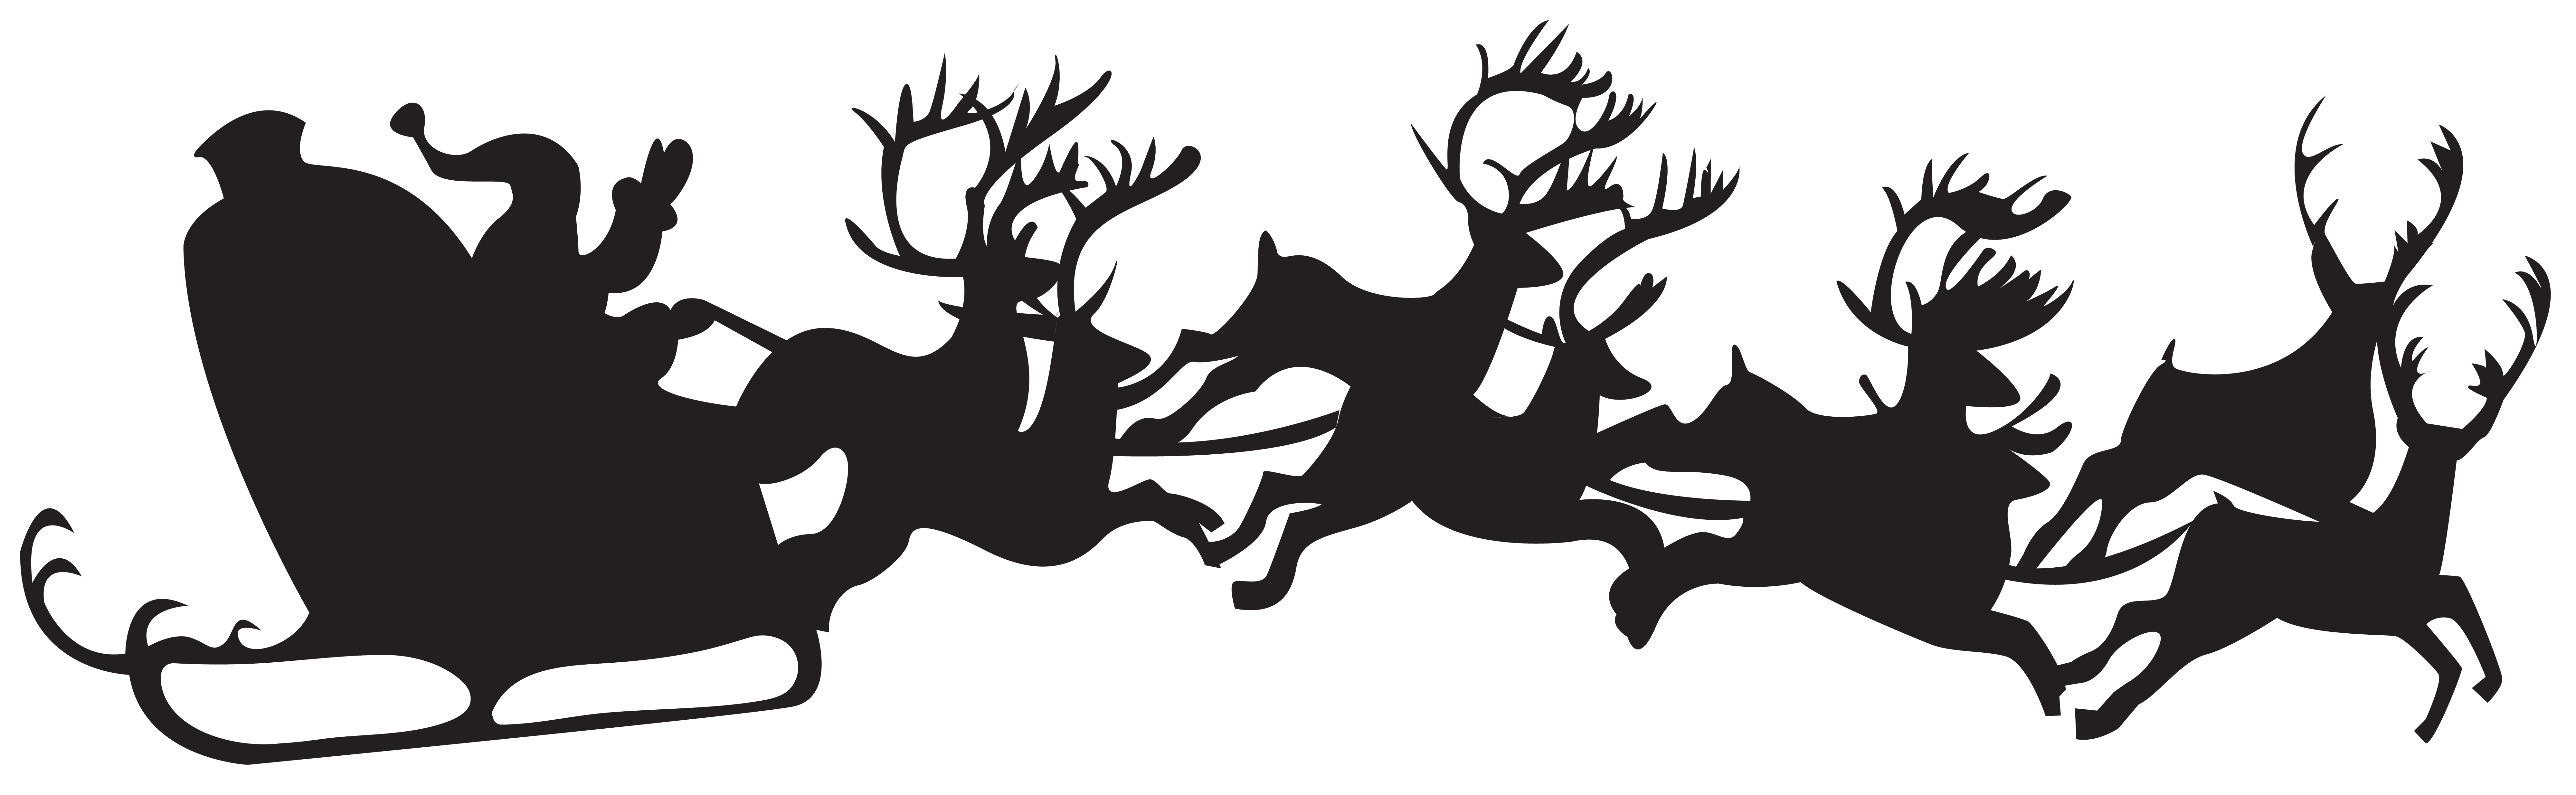 free-sleigh-silhouette-cliparts-download-free-sleigh-silhouette